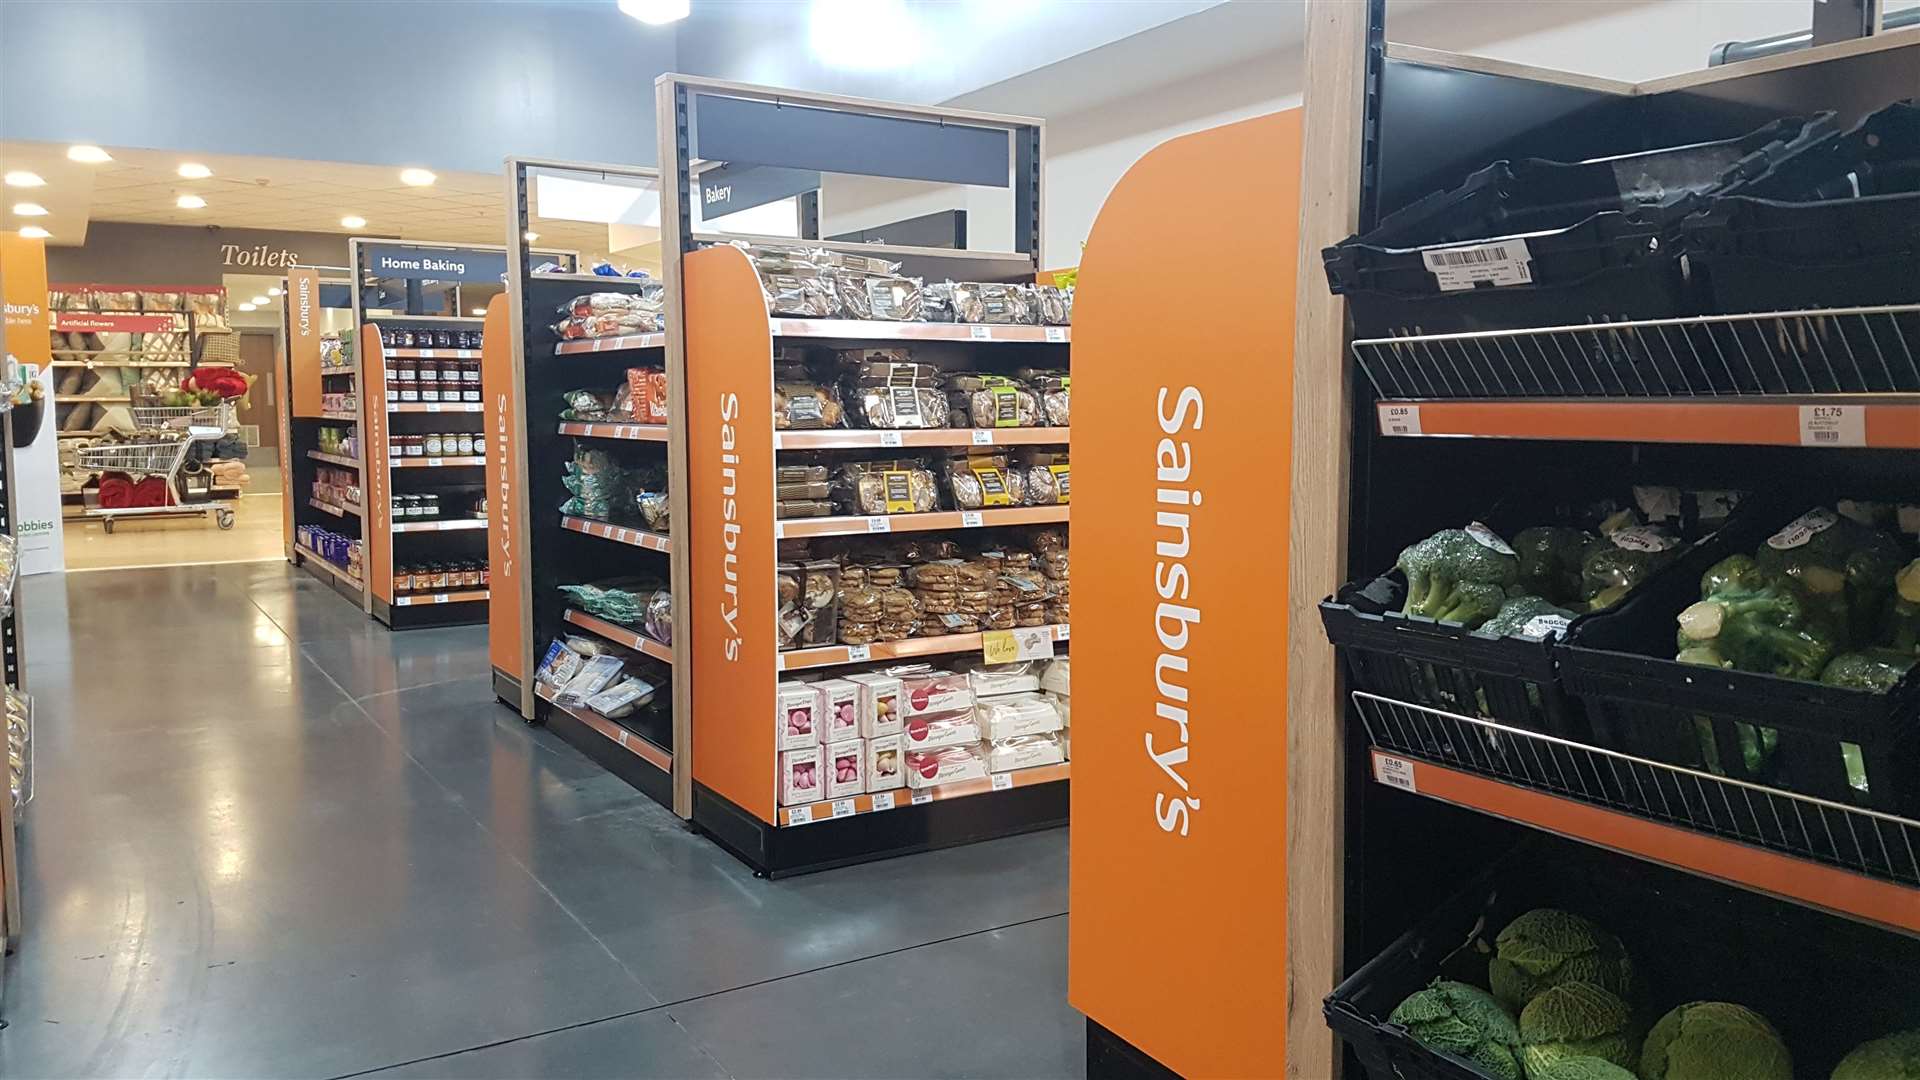 The new Sainsbury's has just opened